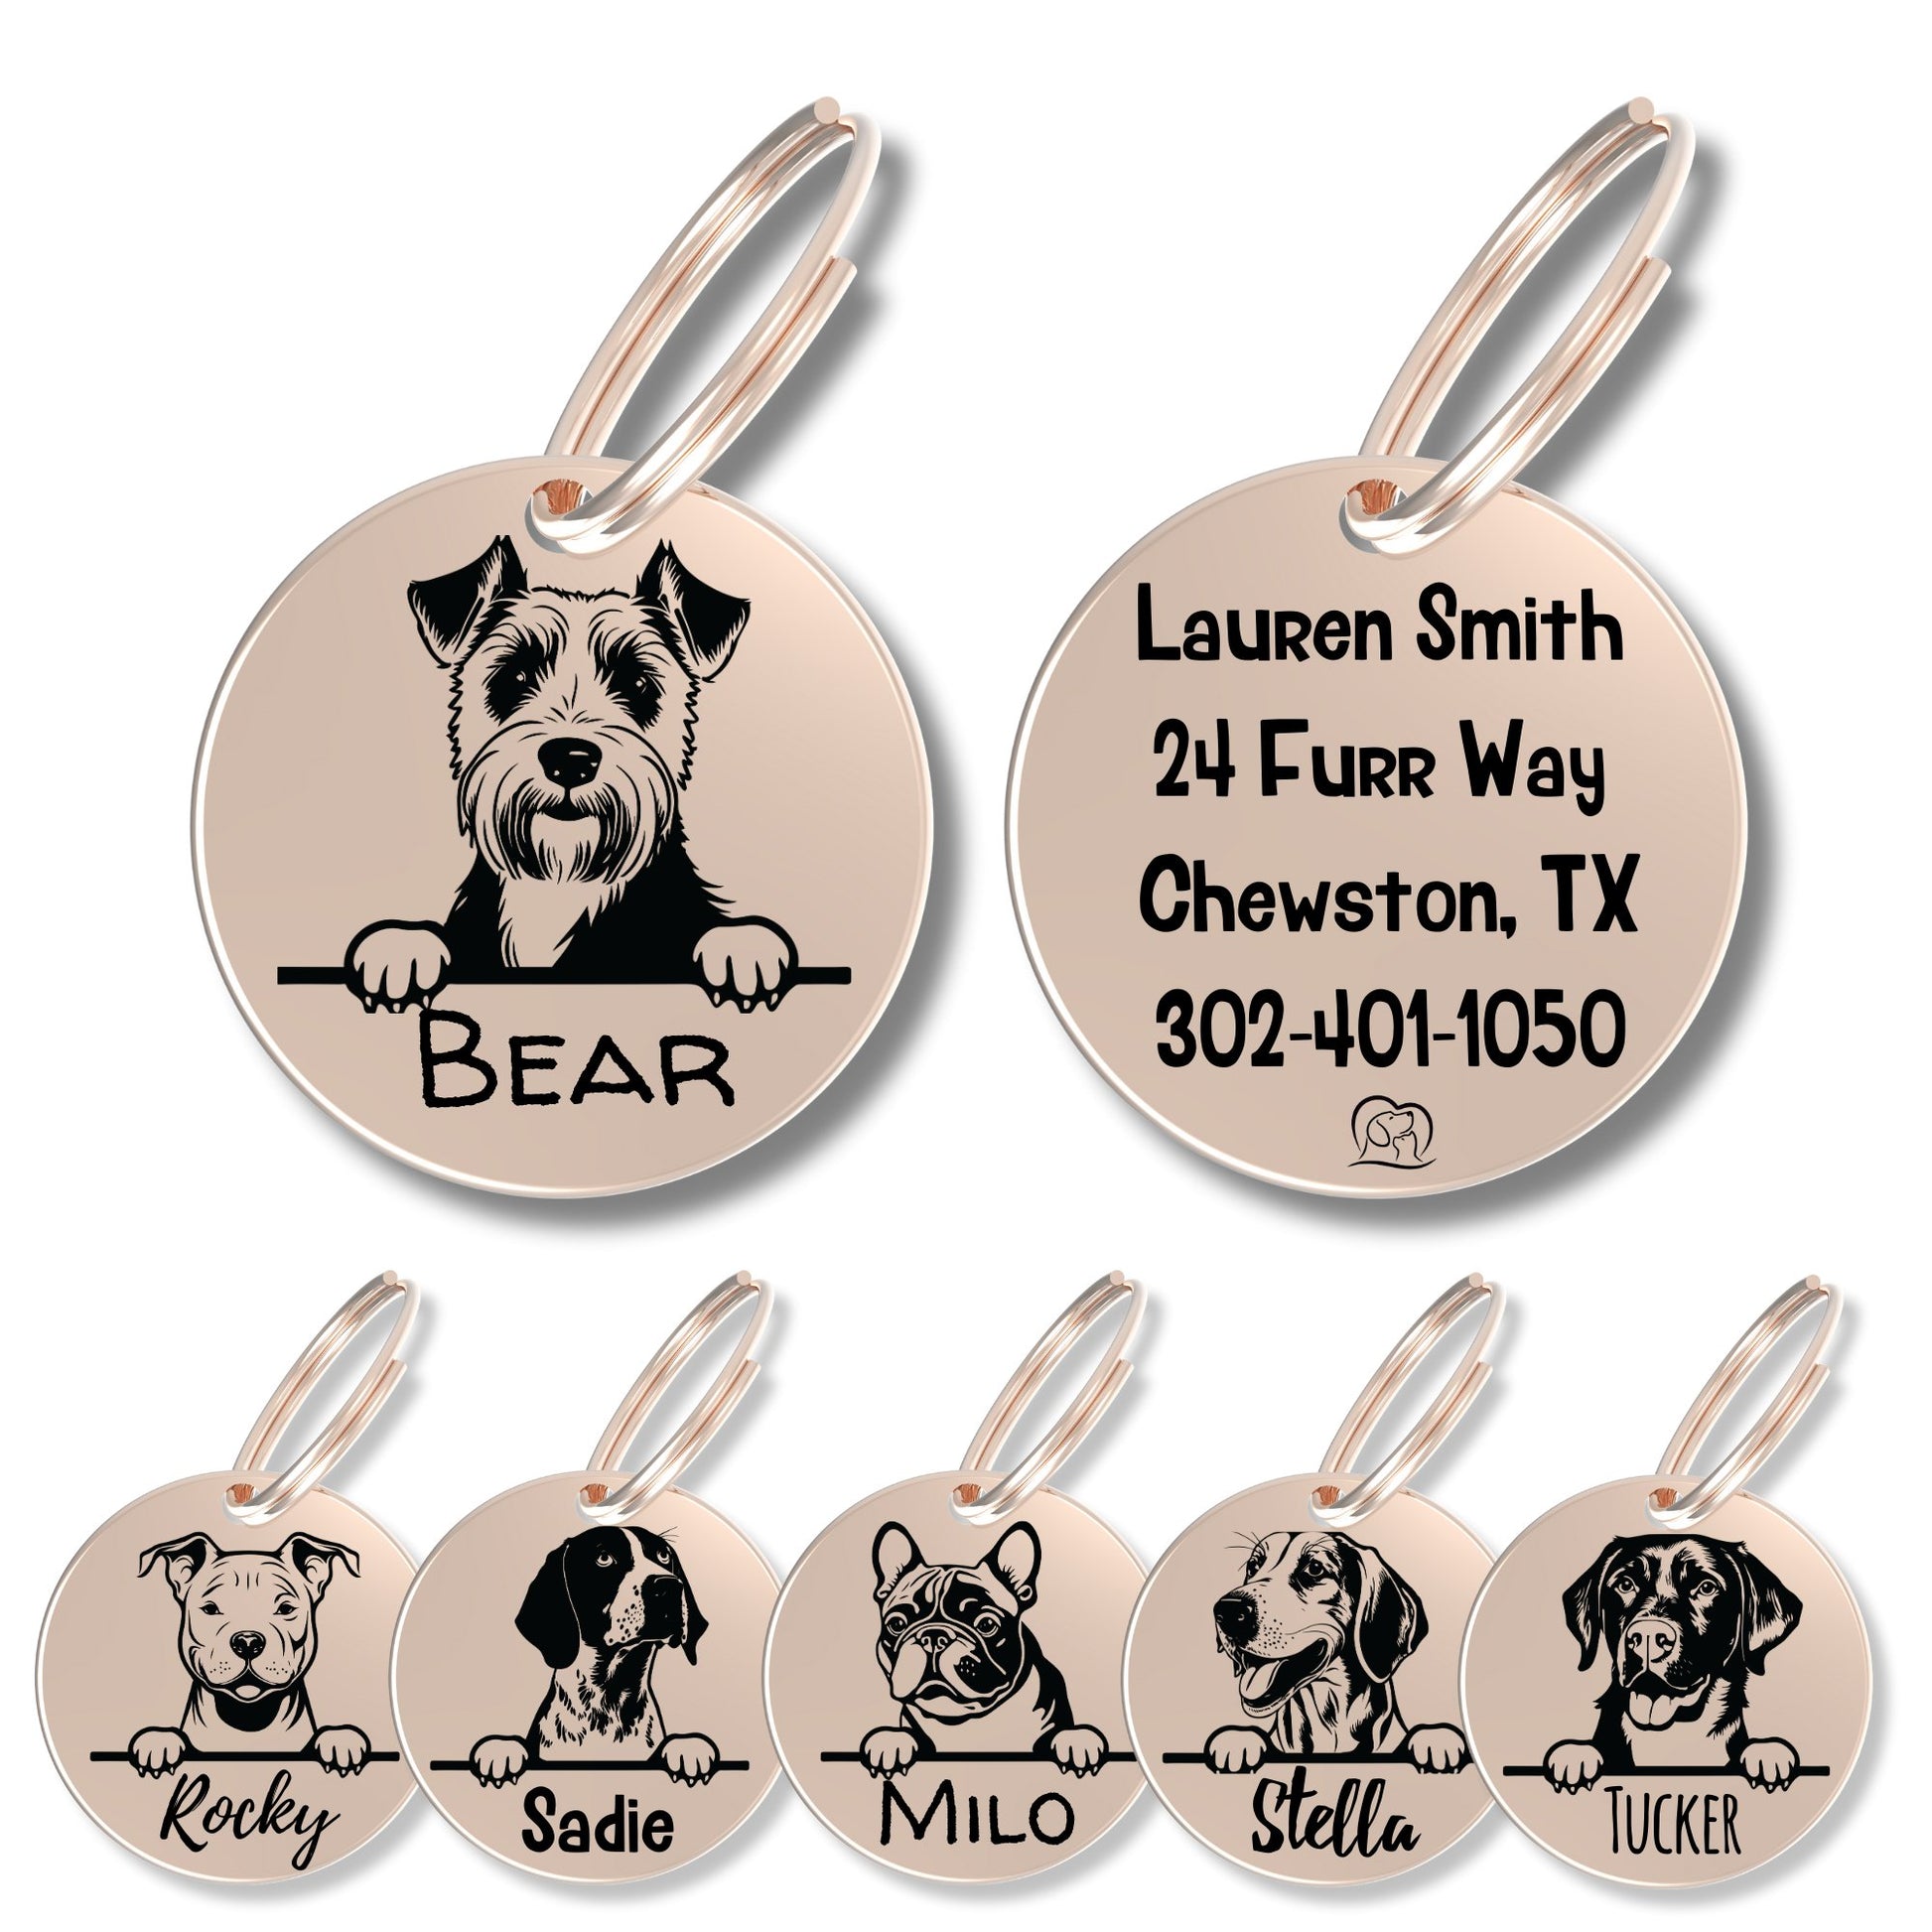 Breed Dog Tag - Personalized Breed Dog Tag (Airedale Terrier)